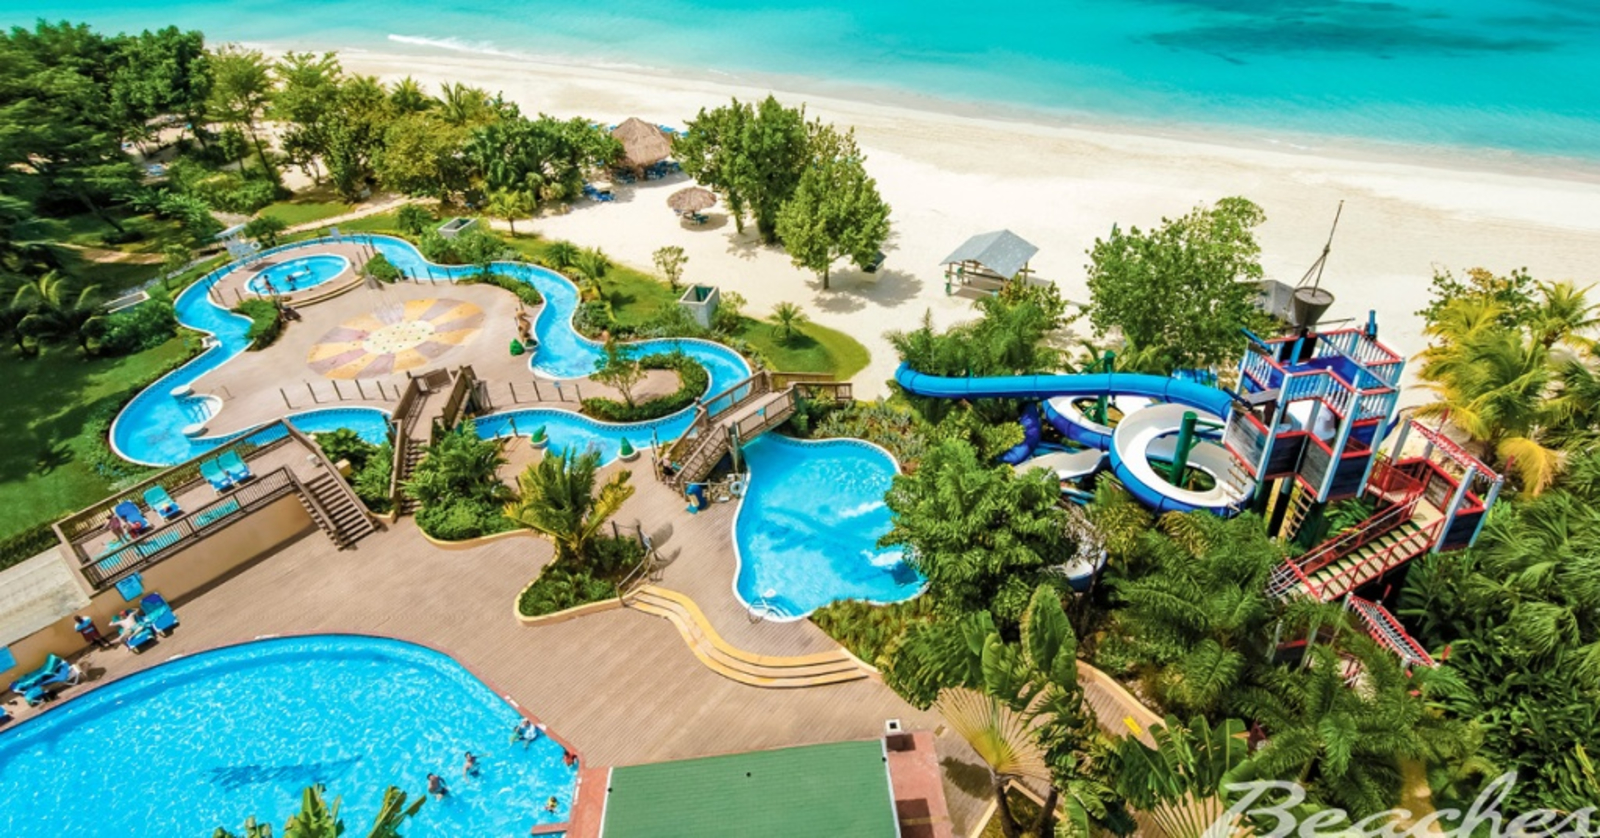 Top down view of a beach resort in Negril - water slides, lazy river, and lush scenery 